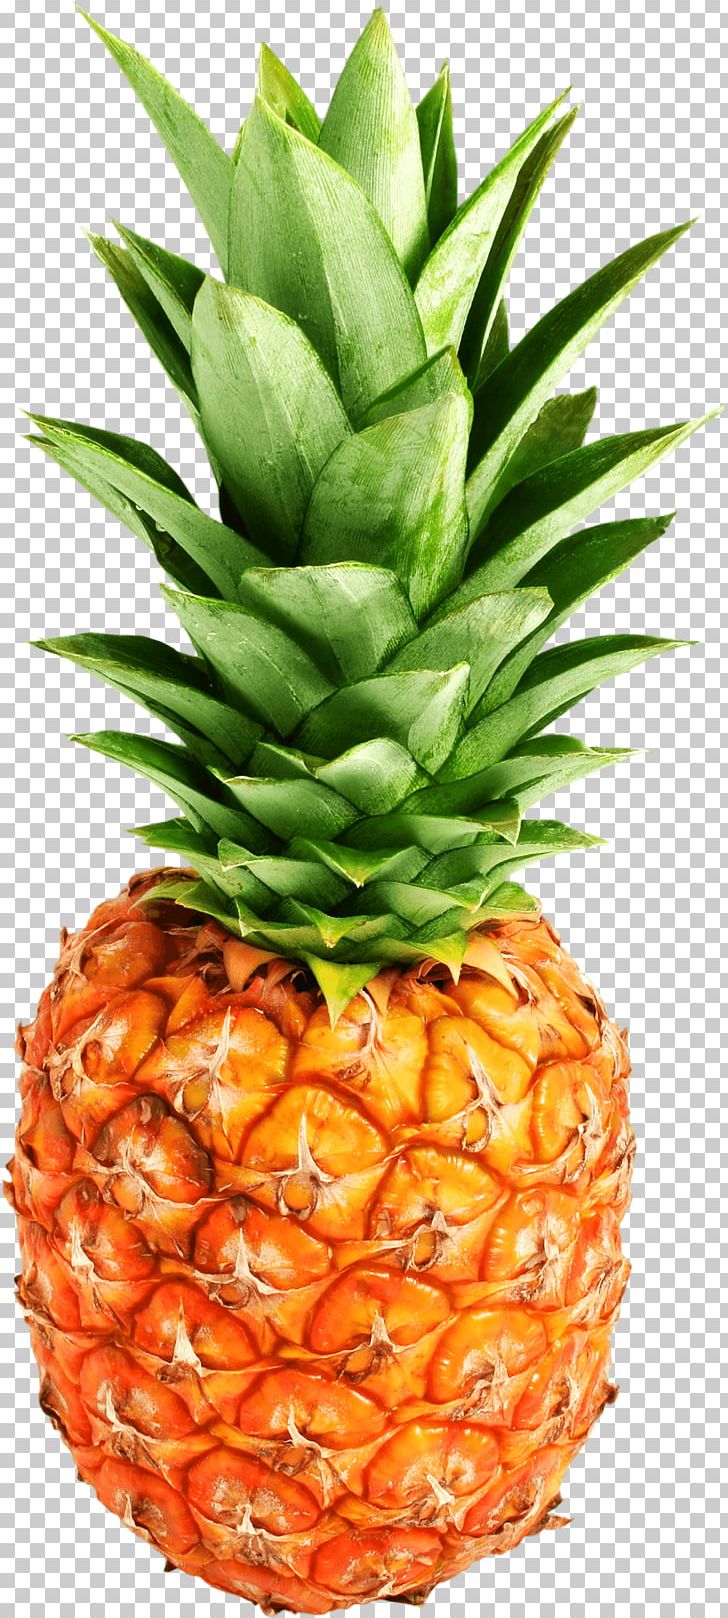 Juice IPhone 7 Pineapple PNG, Clipart, Ananas, Better, Bromeliaceae, Canon, Dow Free PNG Download